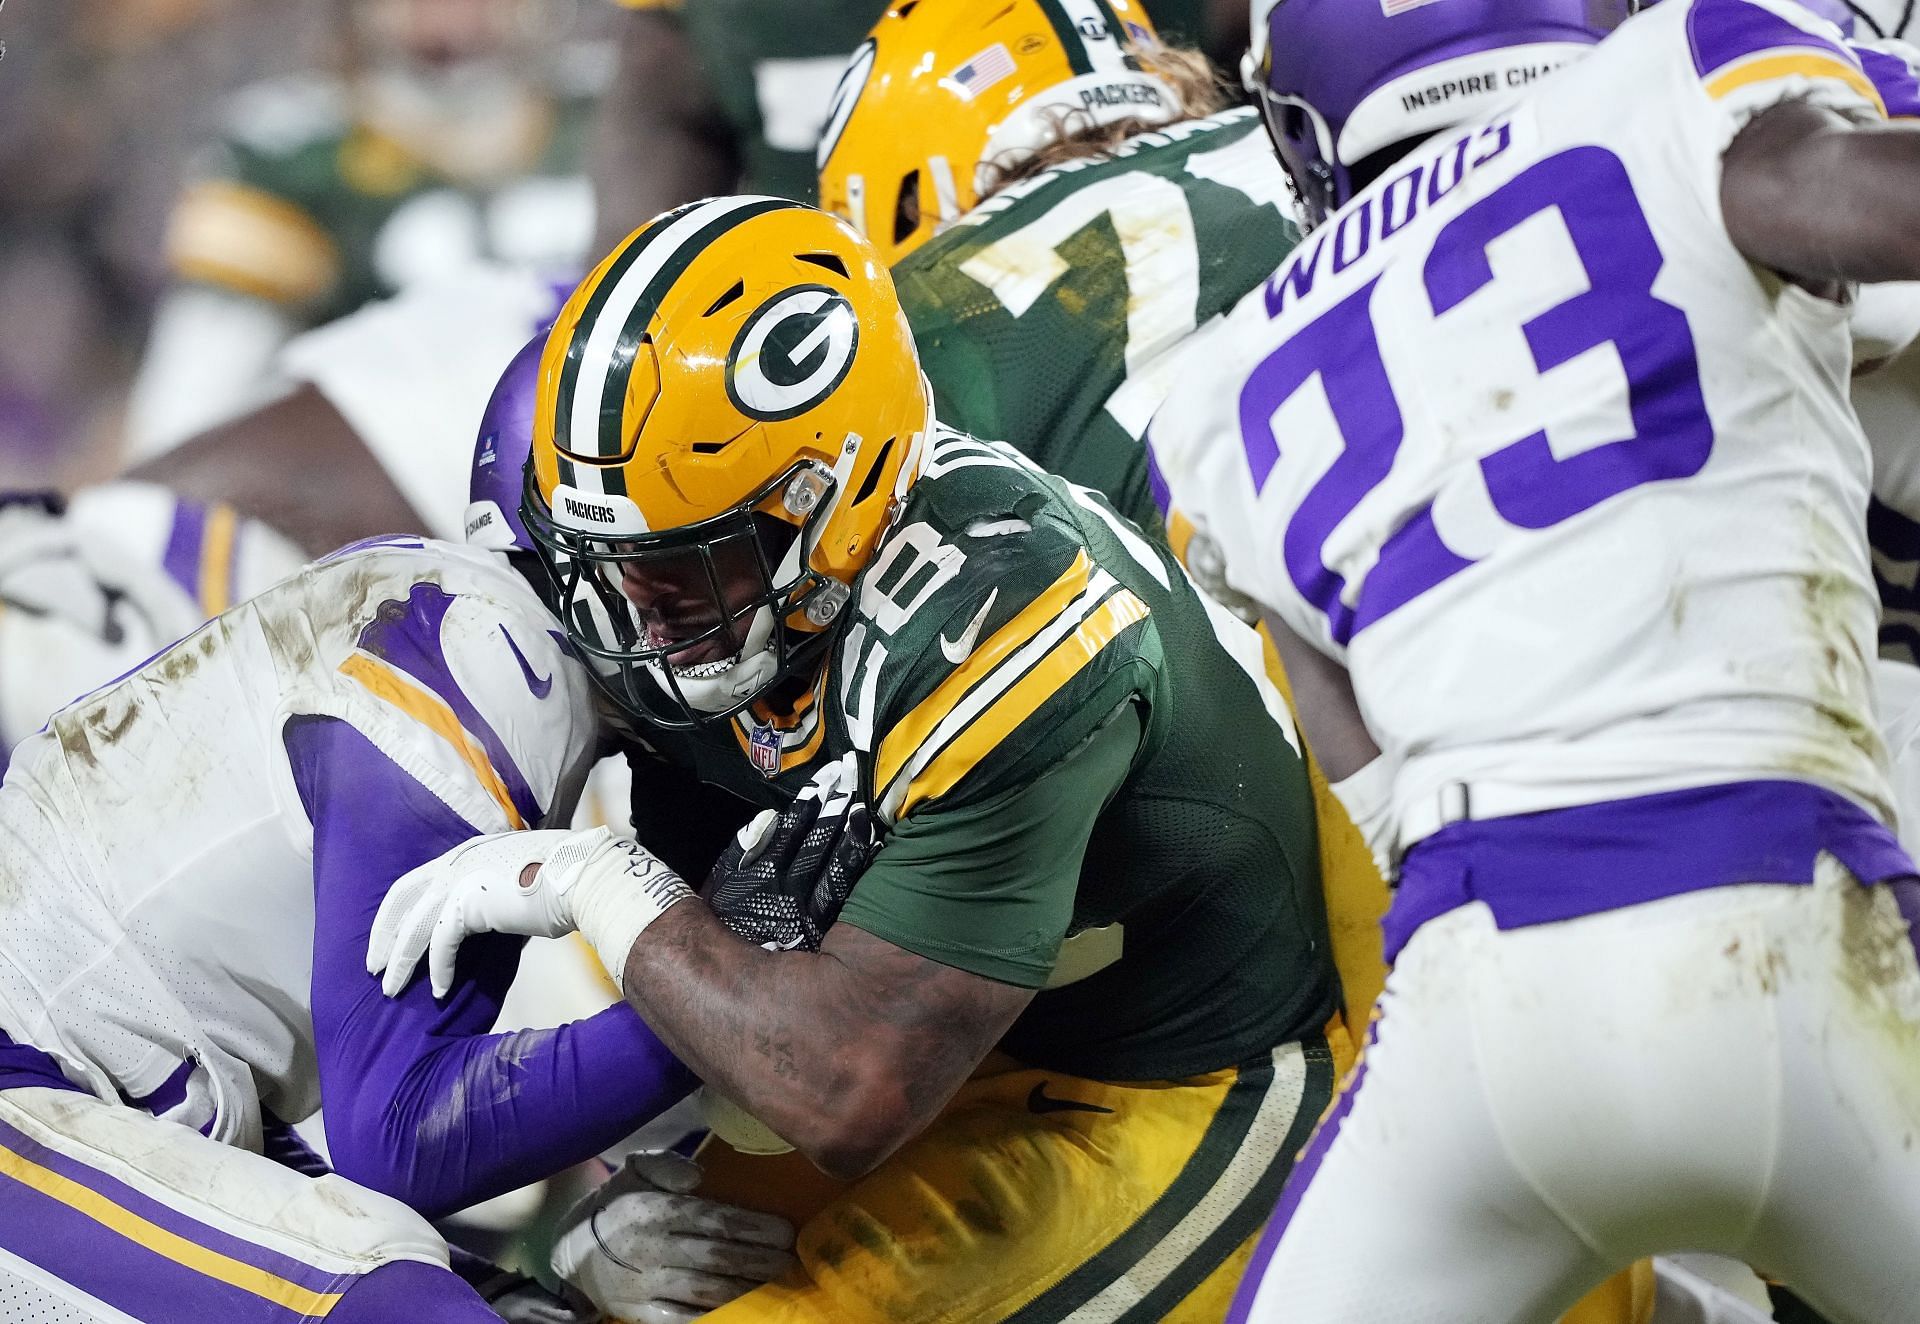 The Green Bay Packers need to bounce back against the Bears